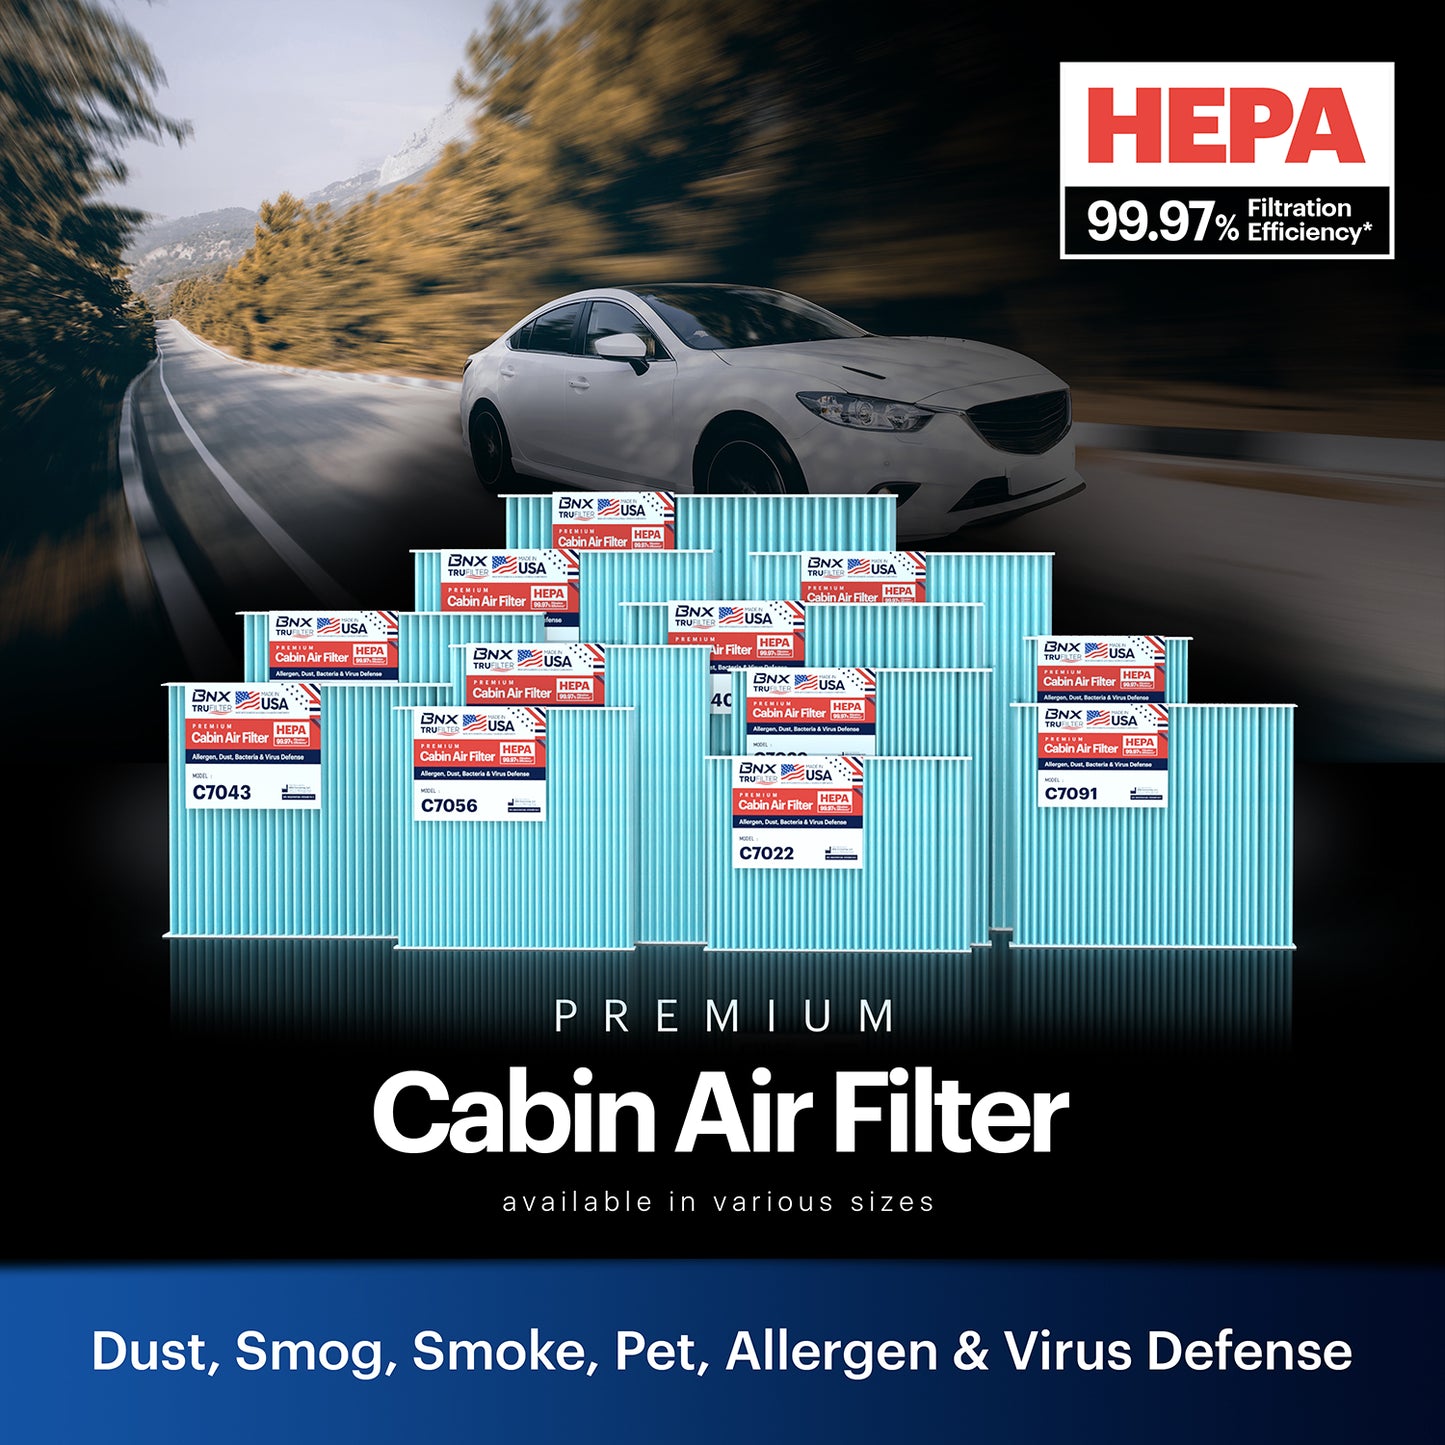 BNX TruFilter C7053 Cabin Air Filter, 99.97% HEPA, MADE IN USA, Compatible With Nissan: Altima 2007-2012, 2009-2014 Maxima, 2009-2014 Murano, 2011-2017 Quest